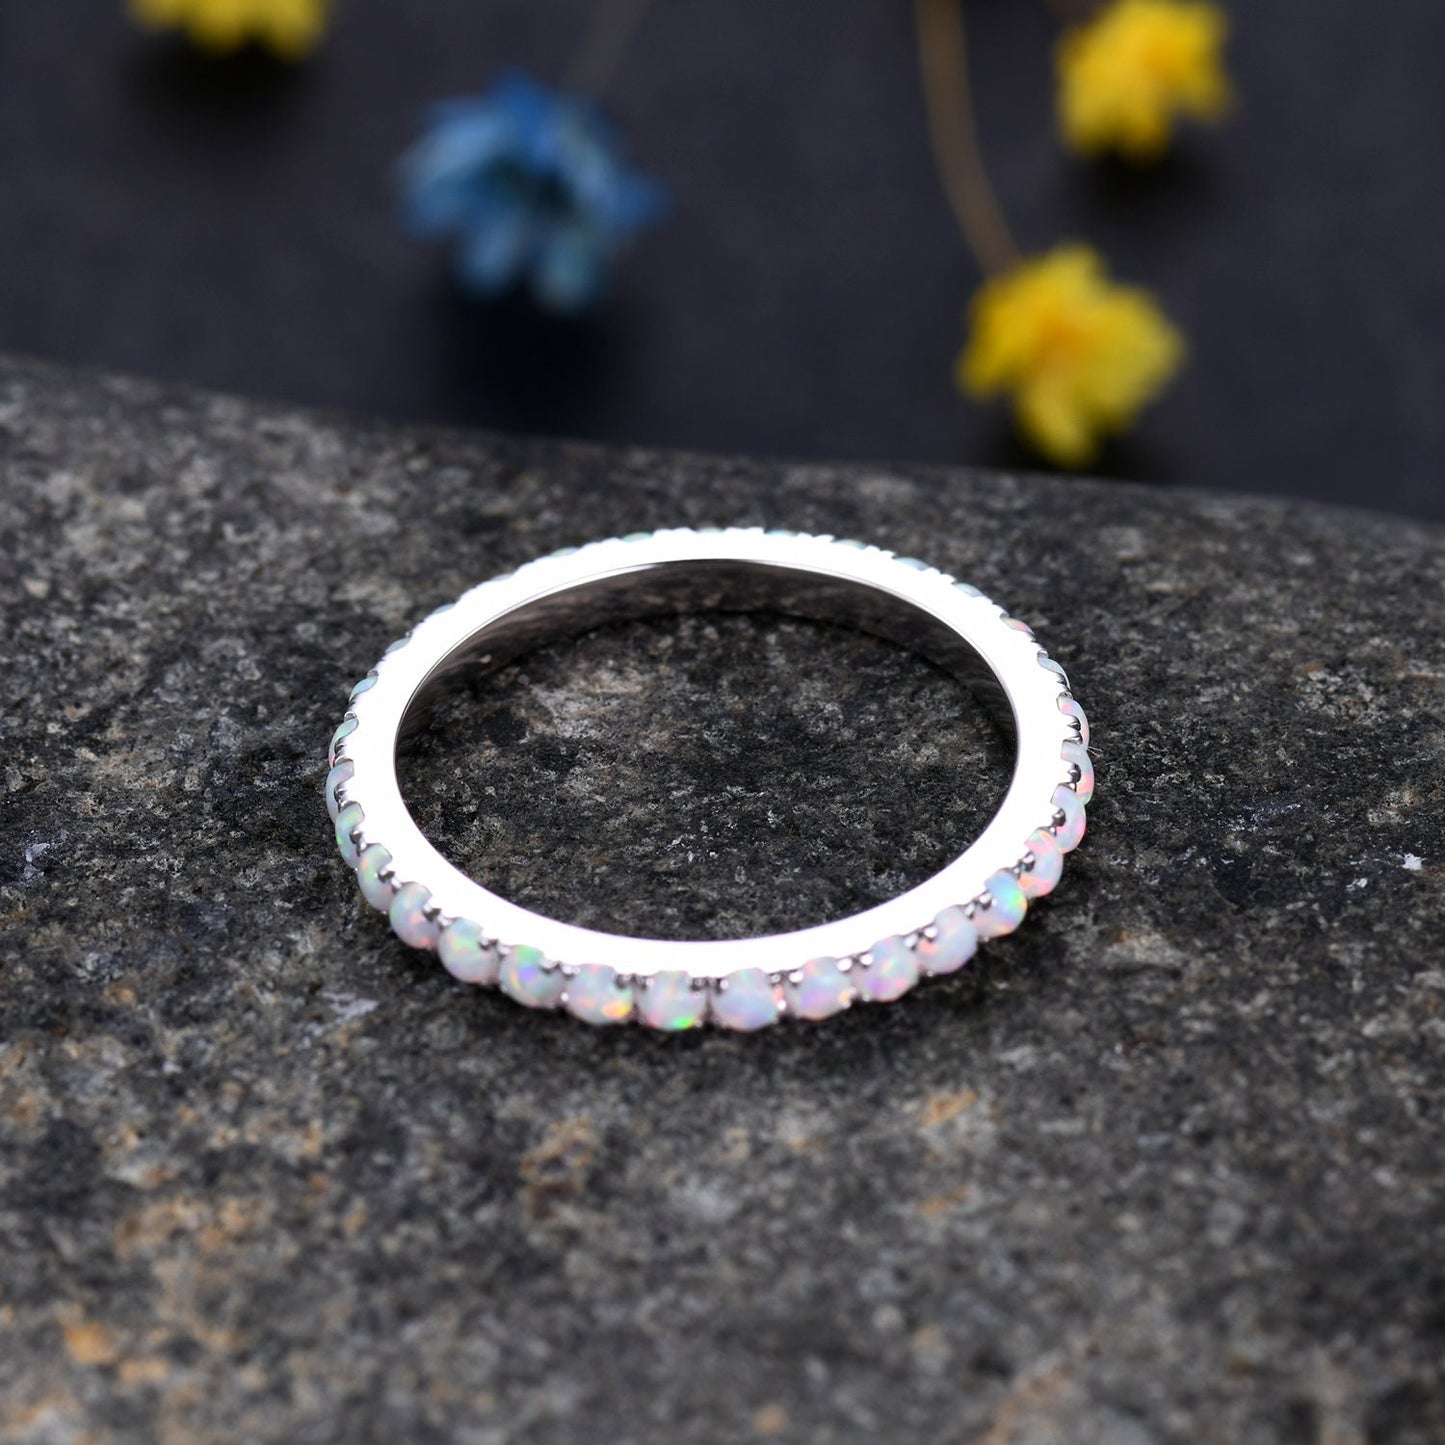 1.5mm Opal Ring,Opal Wedding Band,14K White Gold,Full Eternity Band,Stacking Ring,Matching Band,Promise Ring,Anniversary,Gift for Women